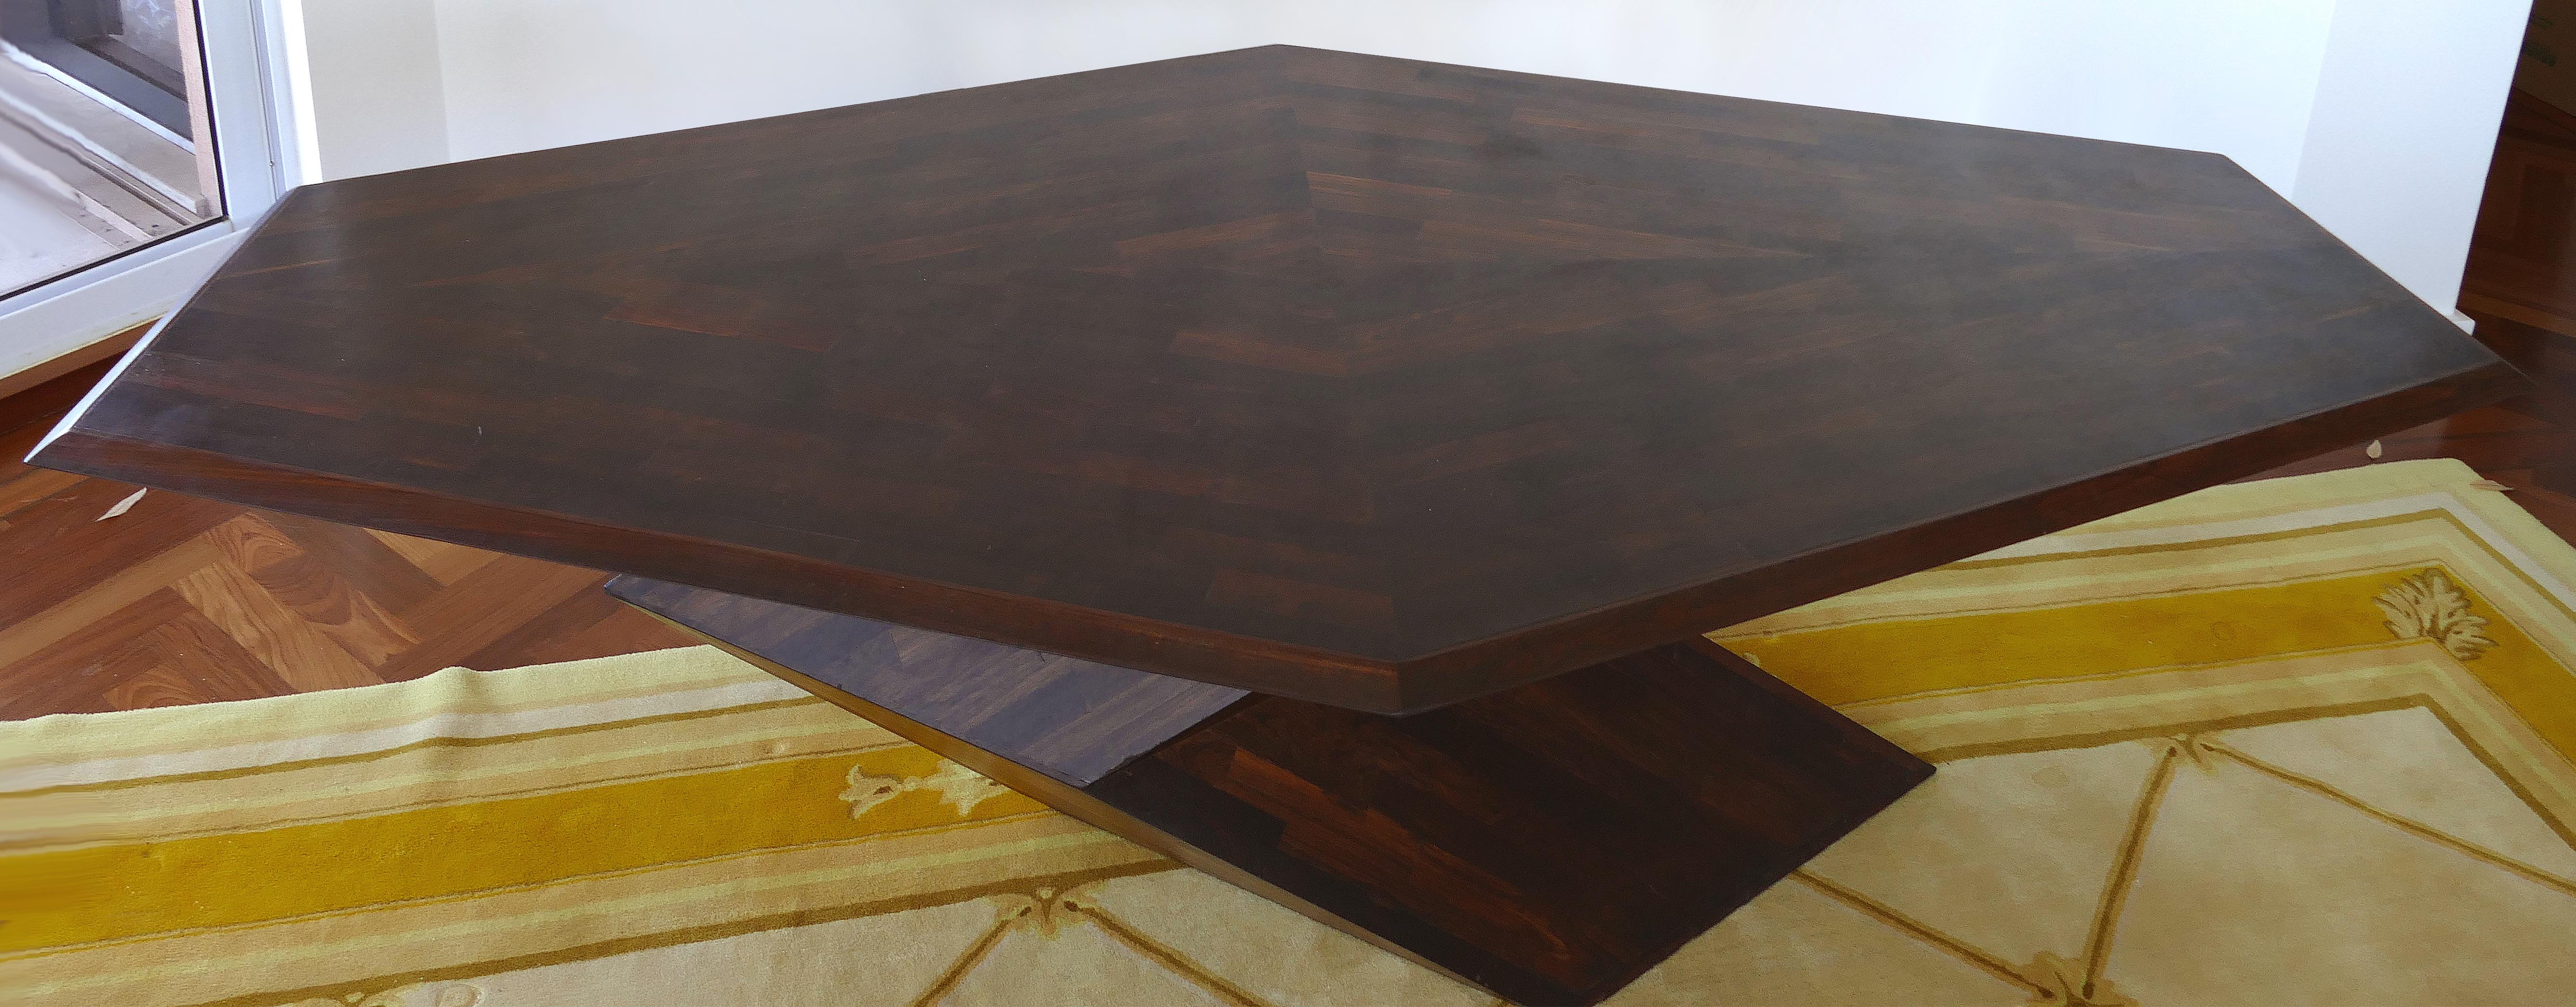 20th Century Don S. Shoemaker Wood Dining Table for Señal Furniture S.A. of Mexico